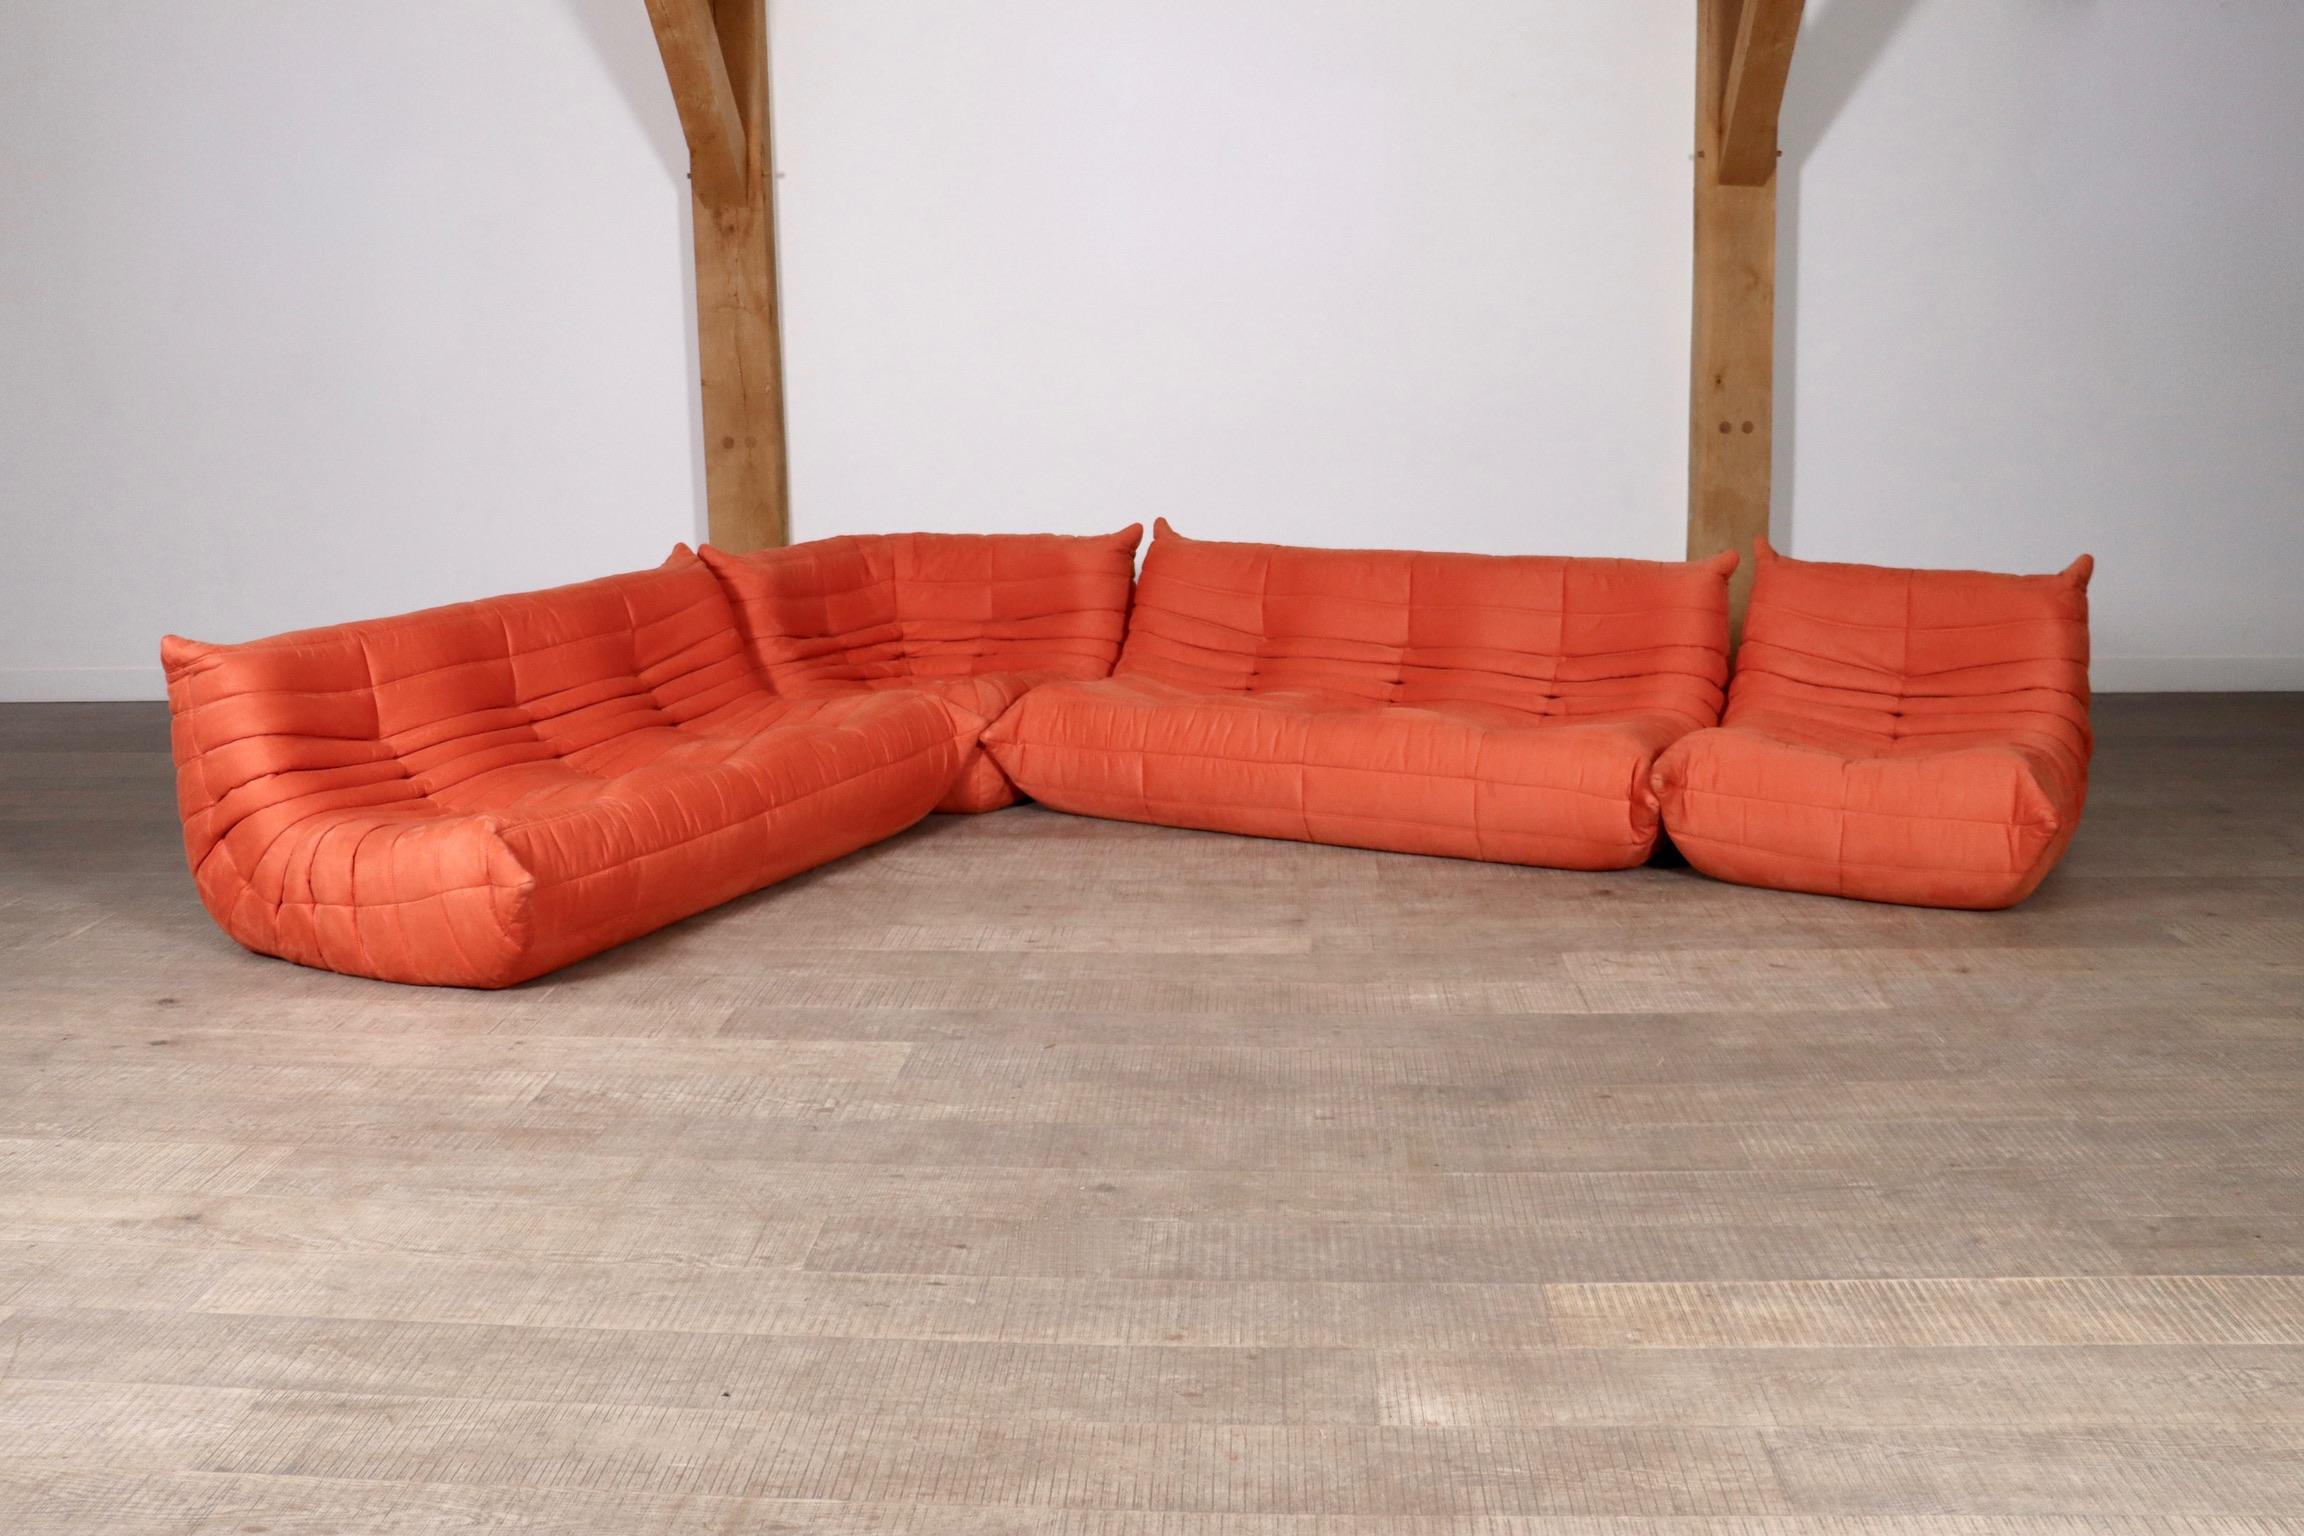 Amazing coral alcantara Togo seating group by Michel Ducaroy for Ligne Roset. The entire seating group has the original Ligne Roset logo and bottoms. The set consists of two 3-seaters, a corner and a lounge chair. The beautiful bright coral colour